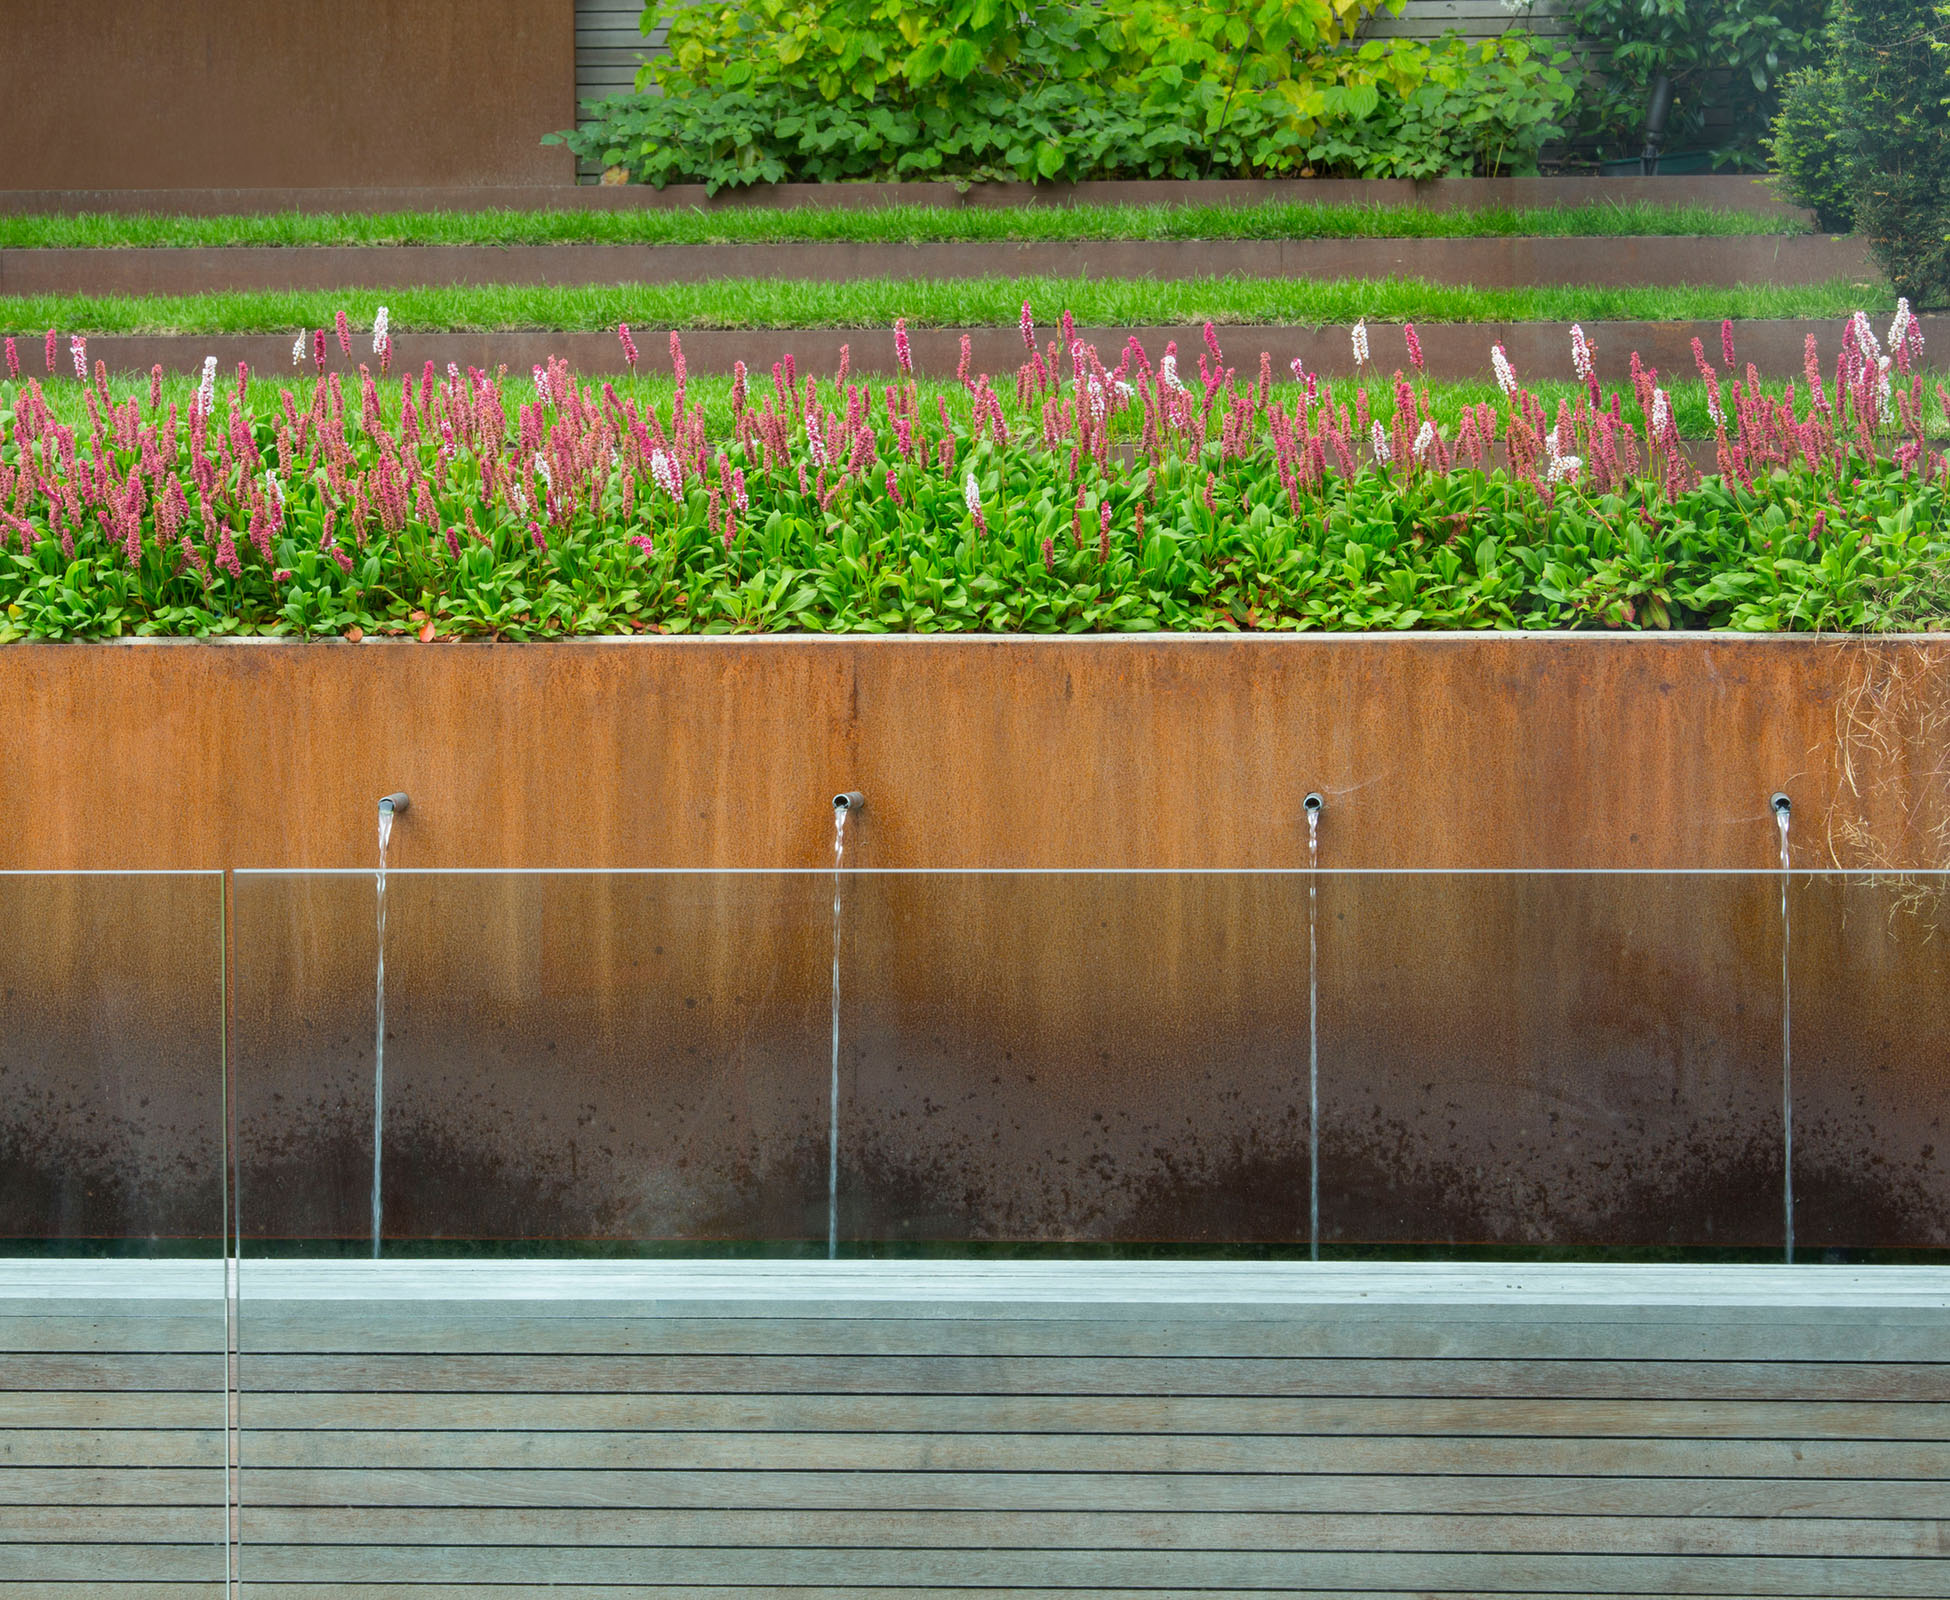 Close up view from this Hampstead house on the bespoke Corten steel water feature. Some Corten risers are visible behind, leading to the rear of the garden.